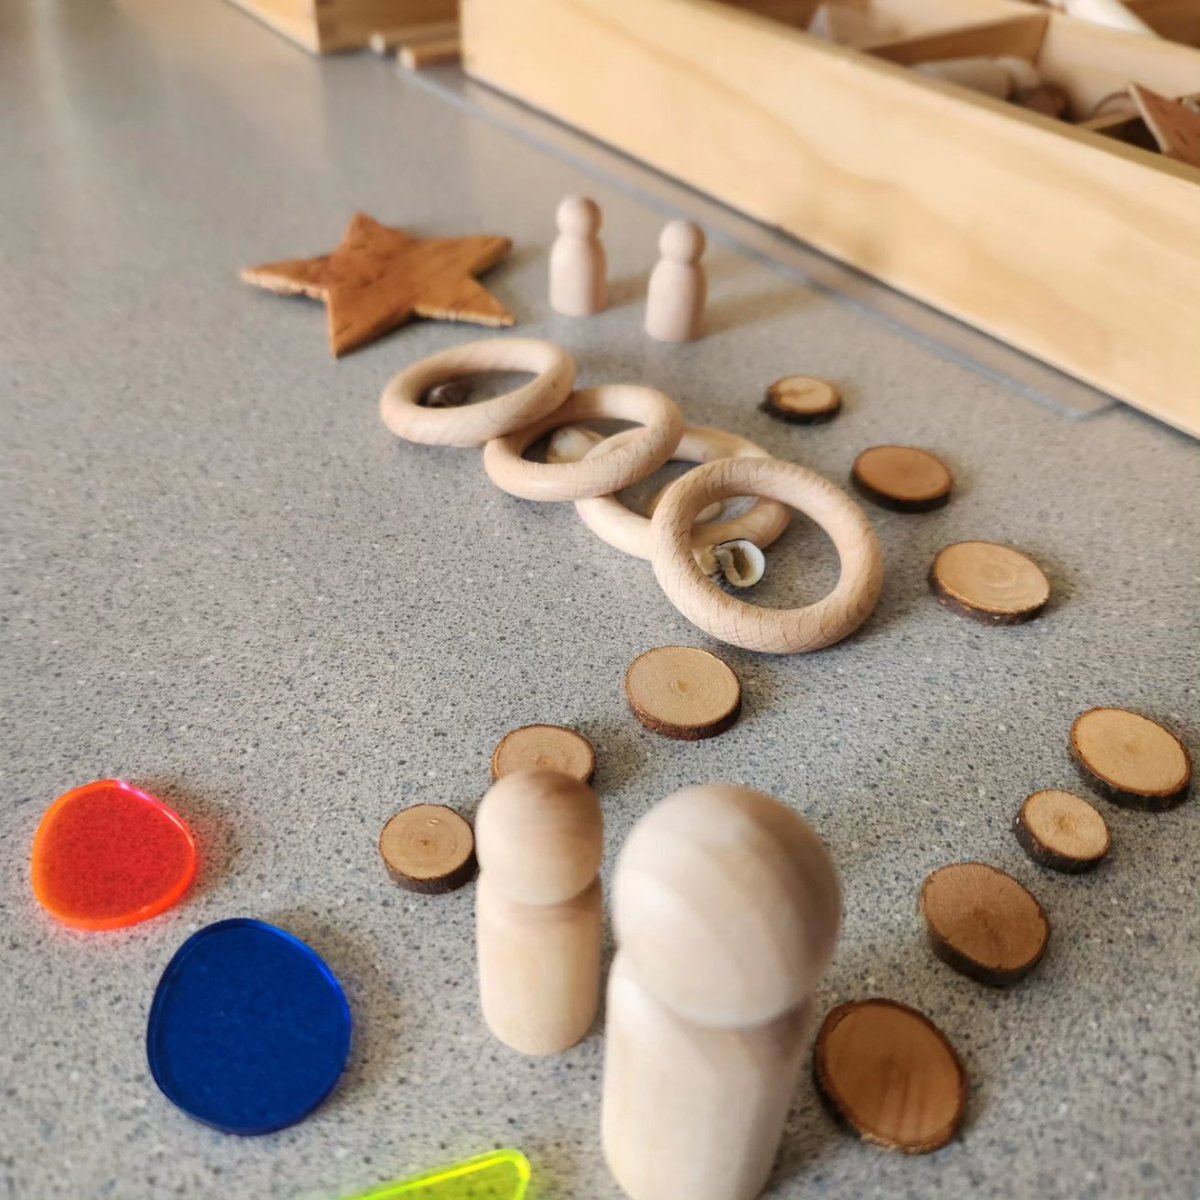 Exploration, collaboration, and critically thinking about my role as a coach. What are my coaching beliefs?

#looseparts #exploration #imaginativeplay #earlyyearseducation